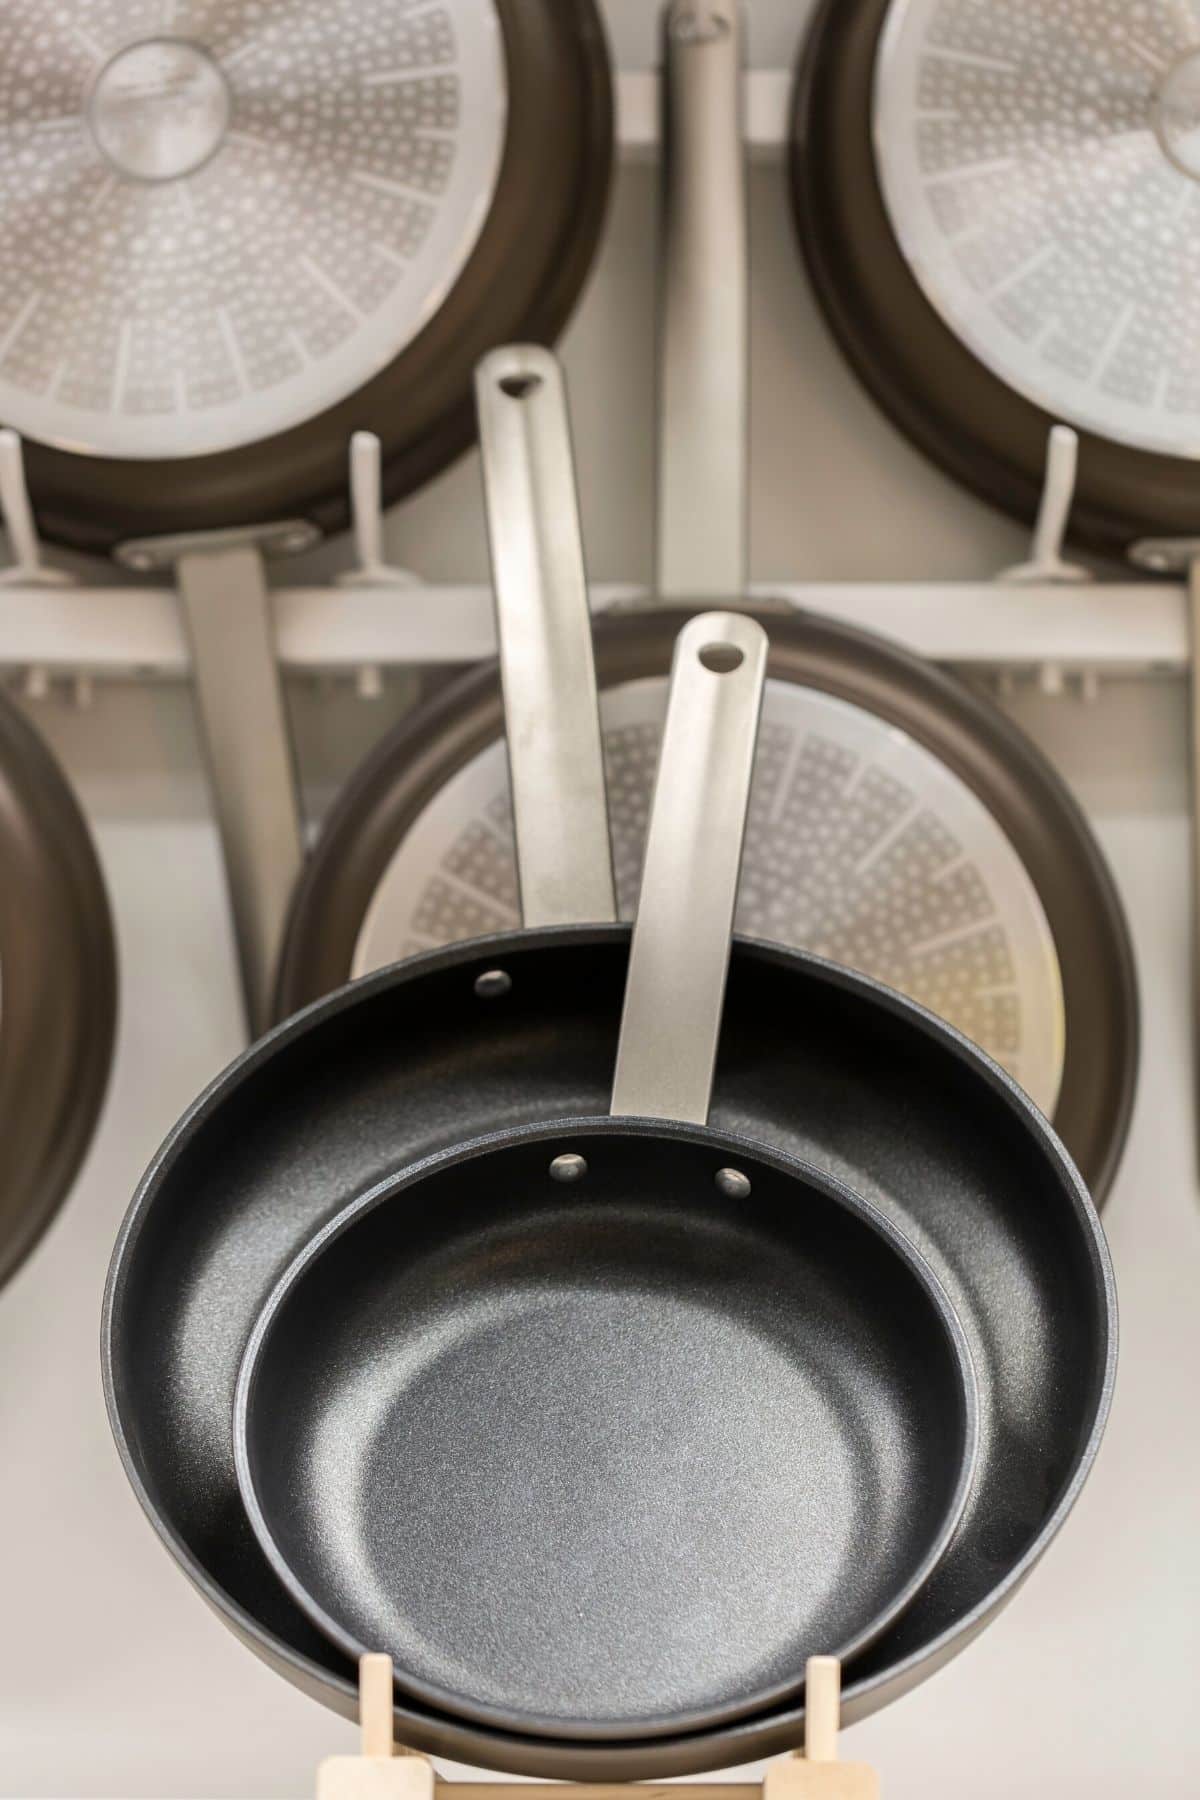 How to care for your cookware—stainless steel, cast-iron, nonstick